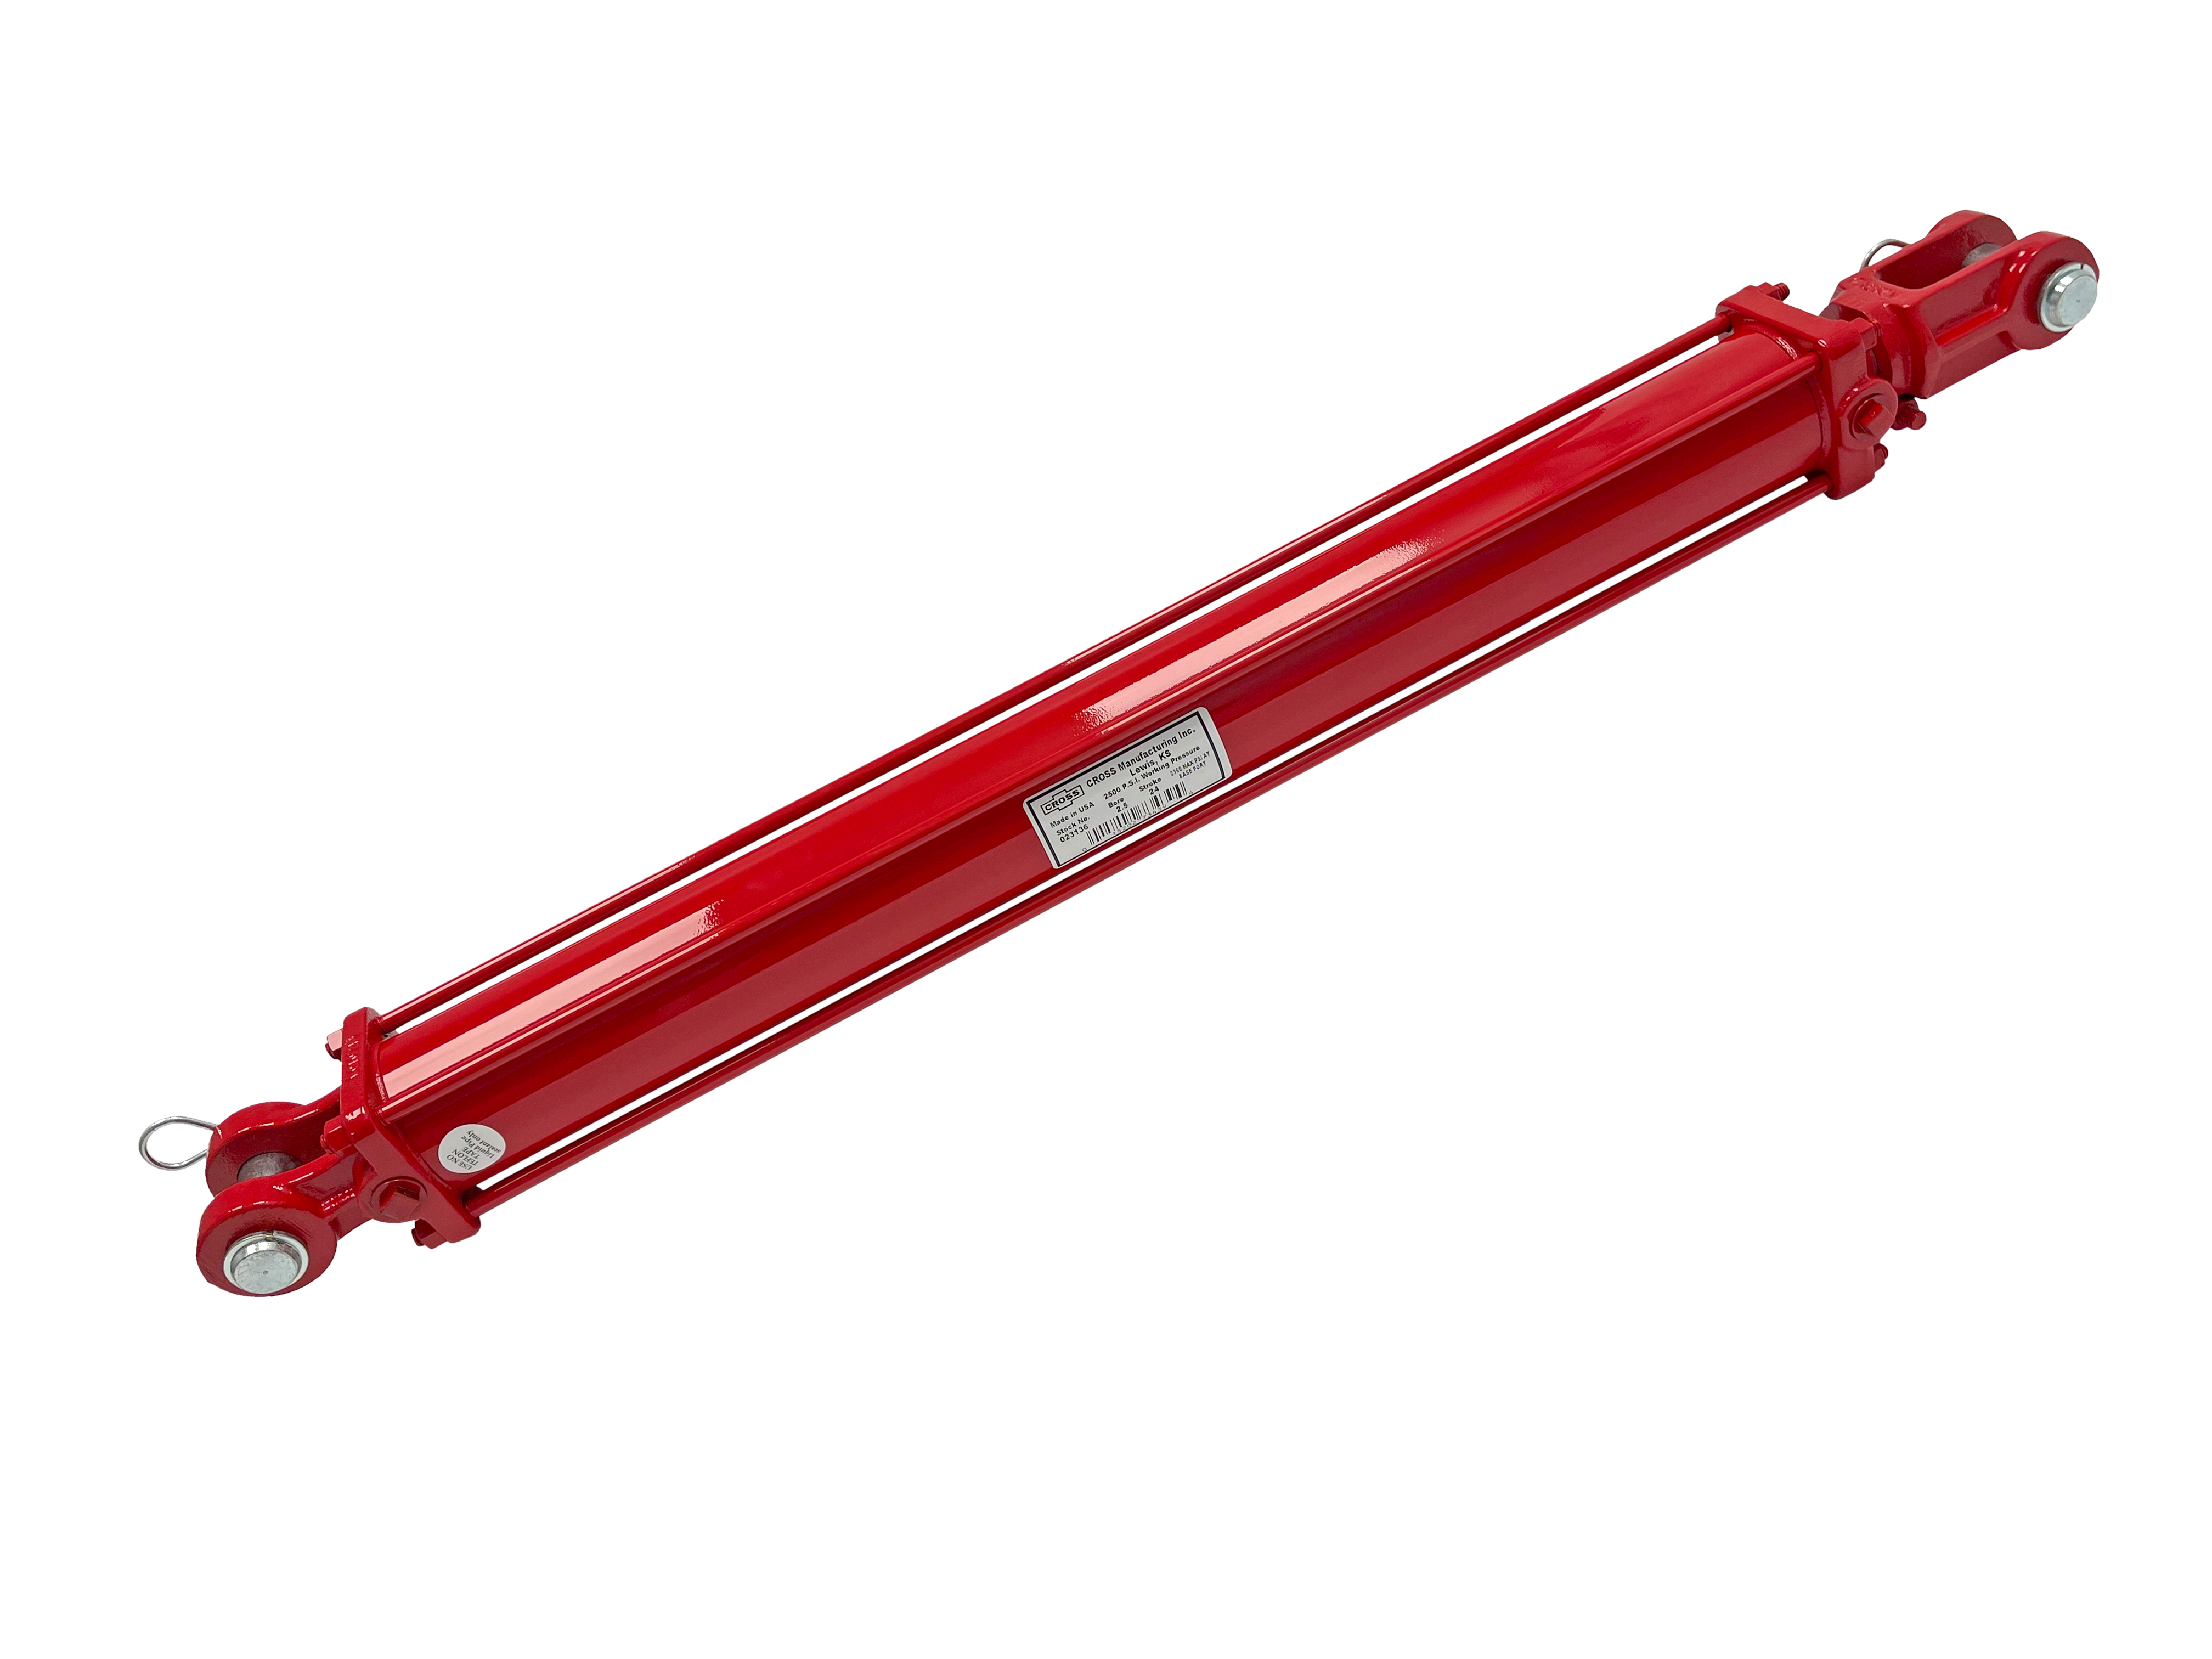 3 Bore Diameter 2500 psi 1/2 NPTF Port 12 Stroke Length Clevis Mounting Red CROSS Manufacturing 22639 DB Series Alloy Steel Tie-Rod Hydraulic Lifting Cylinder 